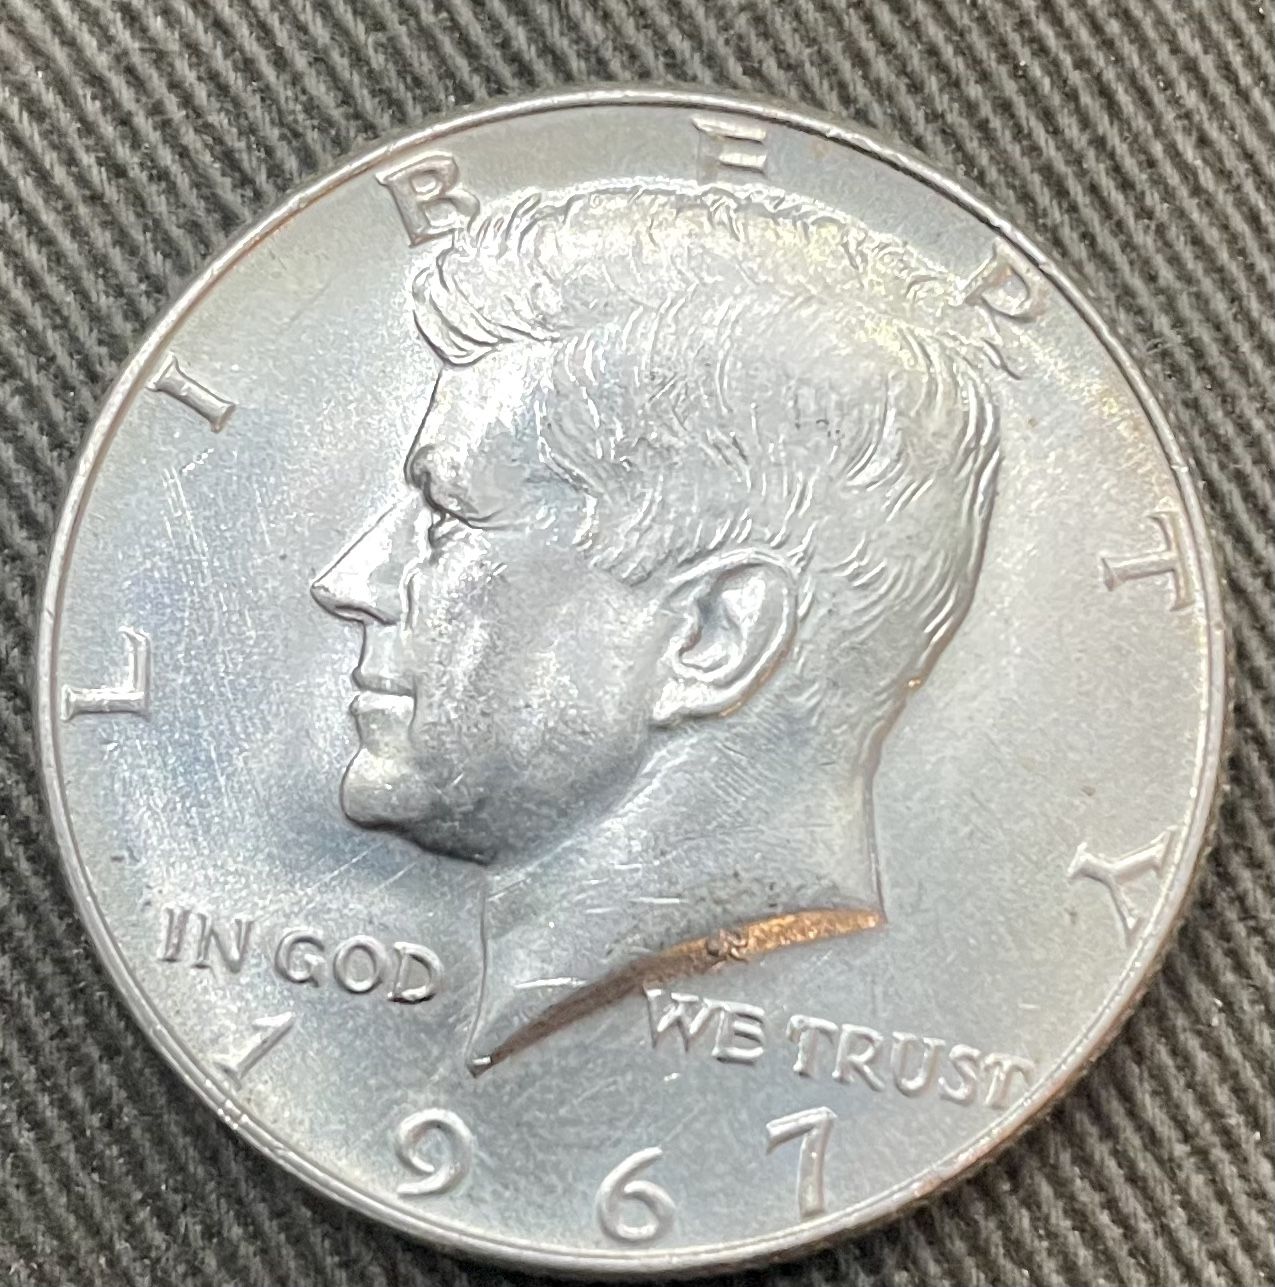 Yes This One is the Rare 1967 DDO Obverse Kennedy Half Dollar